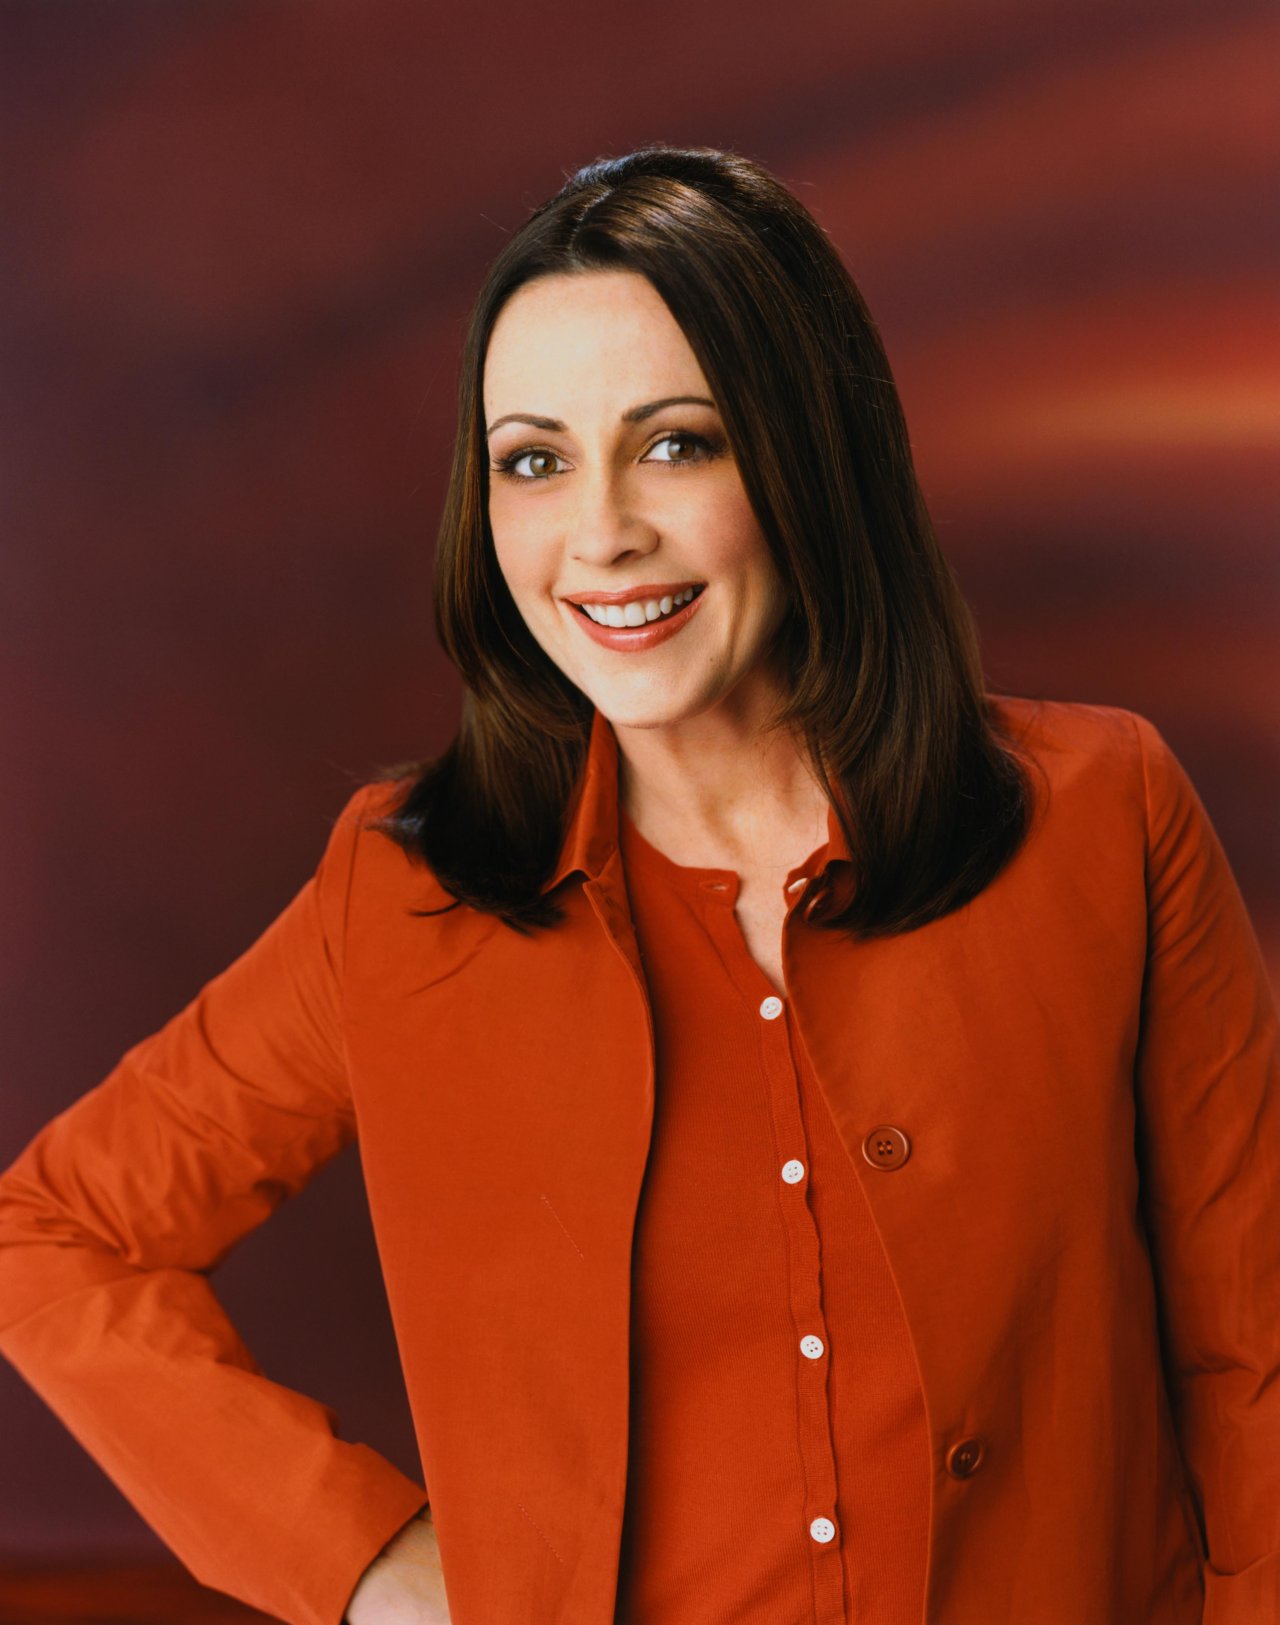 Patricia Heaton leaked wallpapers